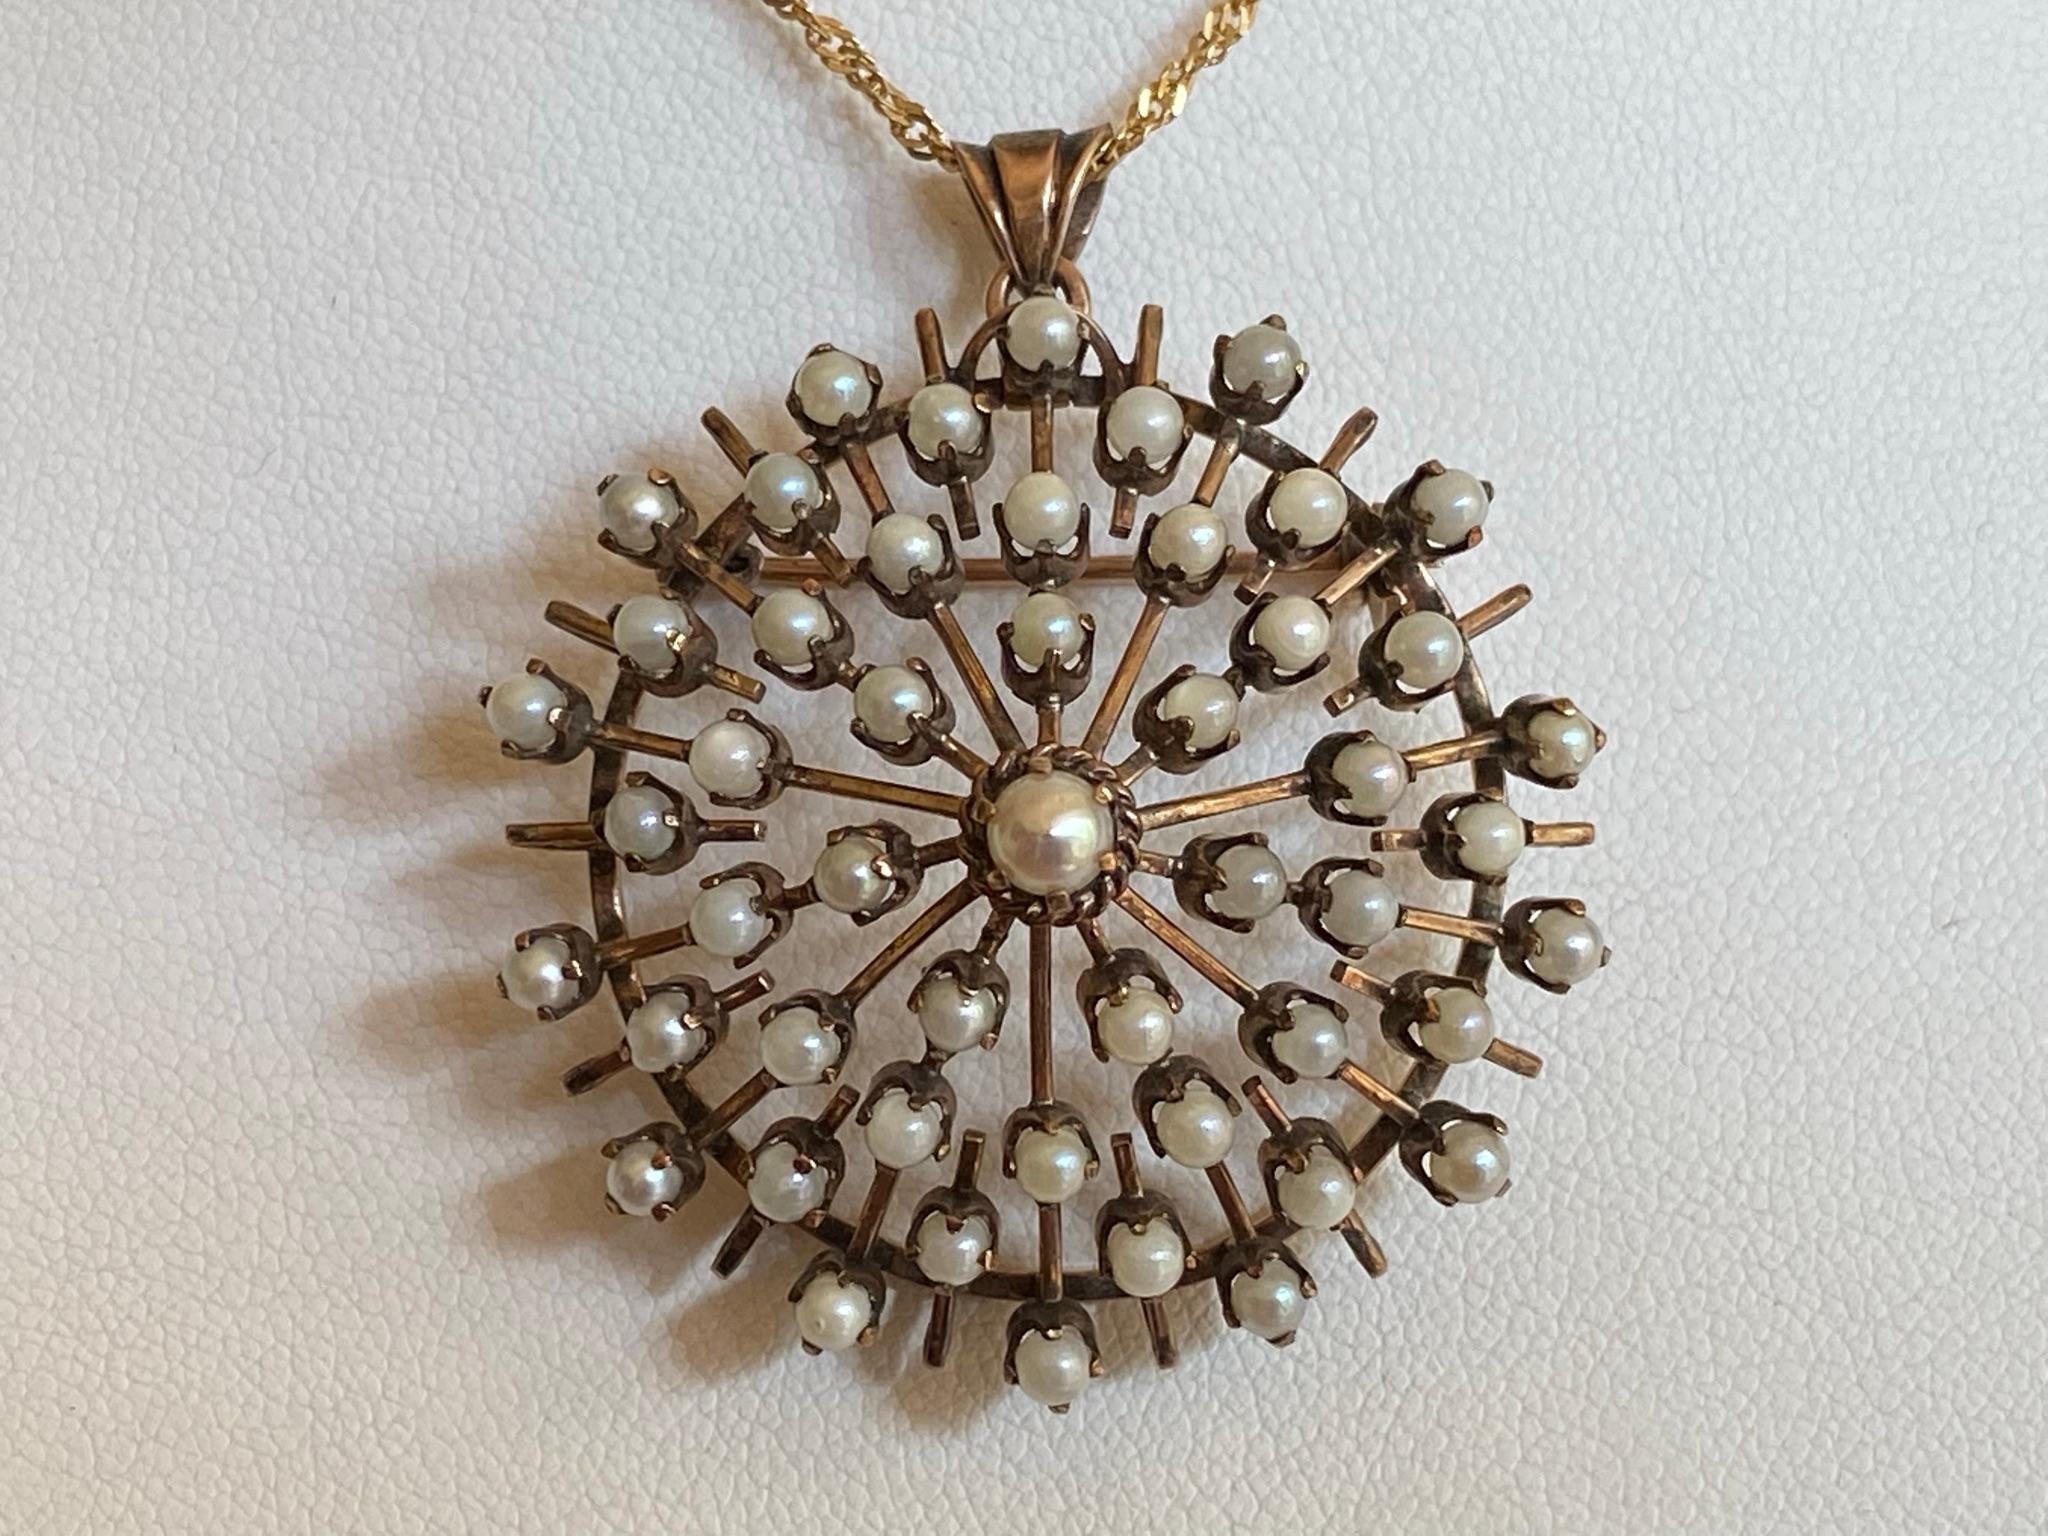 Crafted in the late nineteenth century from 9kt rose gold, this dramatically striking late-Victorian pendant features fifty natural white pearls arrayed over a domed circle with an intricate open work design. The pendant is suspended on a 24 inch